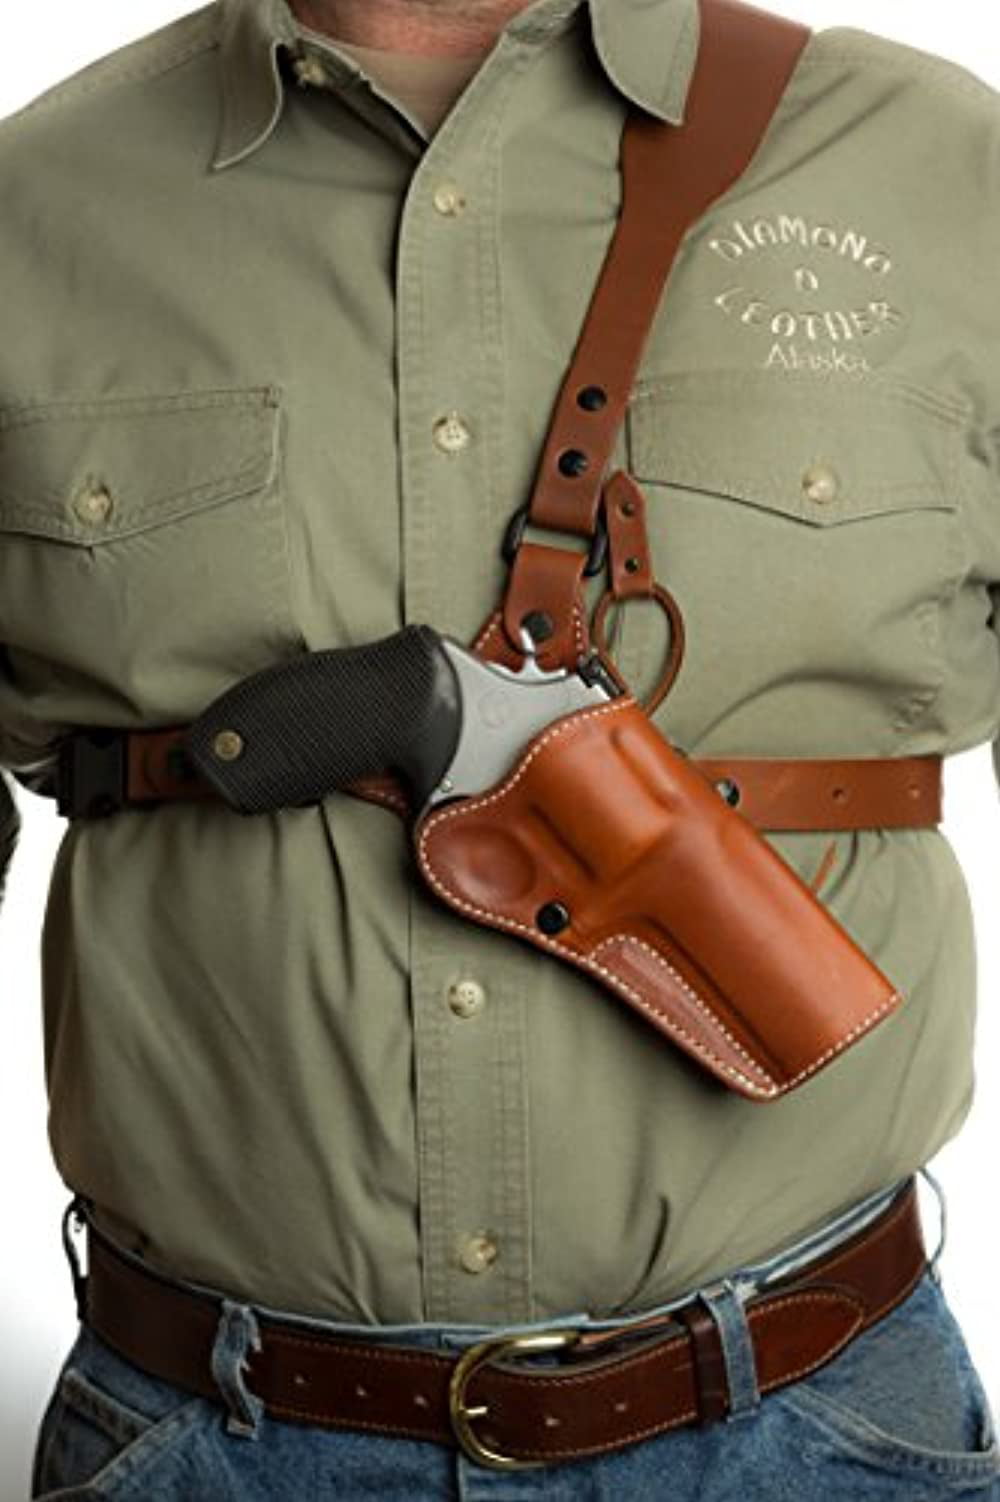 Guides Choice™ Leather Chest Holster, the ULTIMATE outdoor gun holster, Diamond D Custom Leather